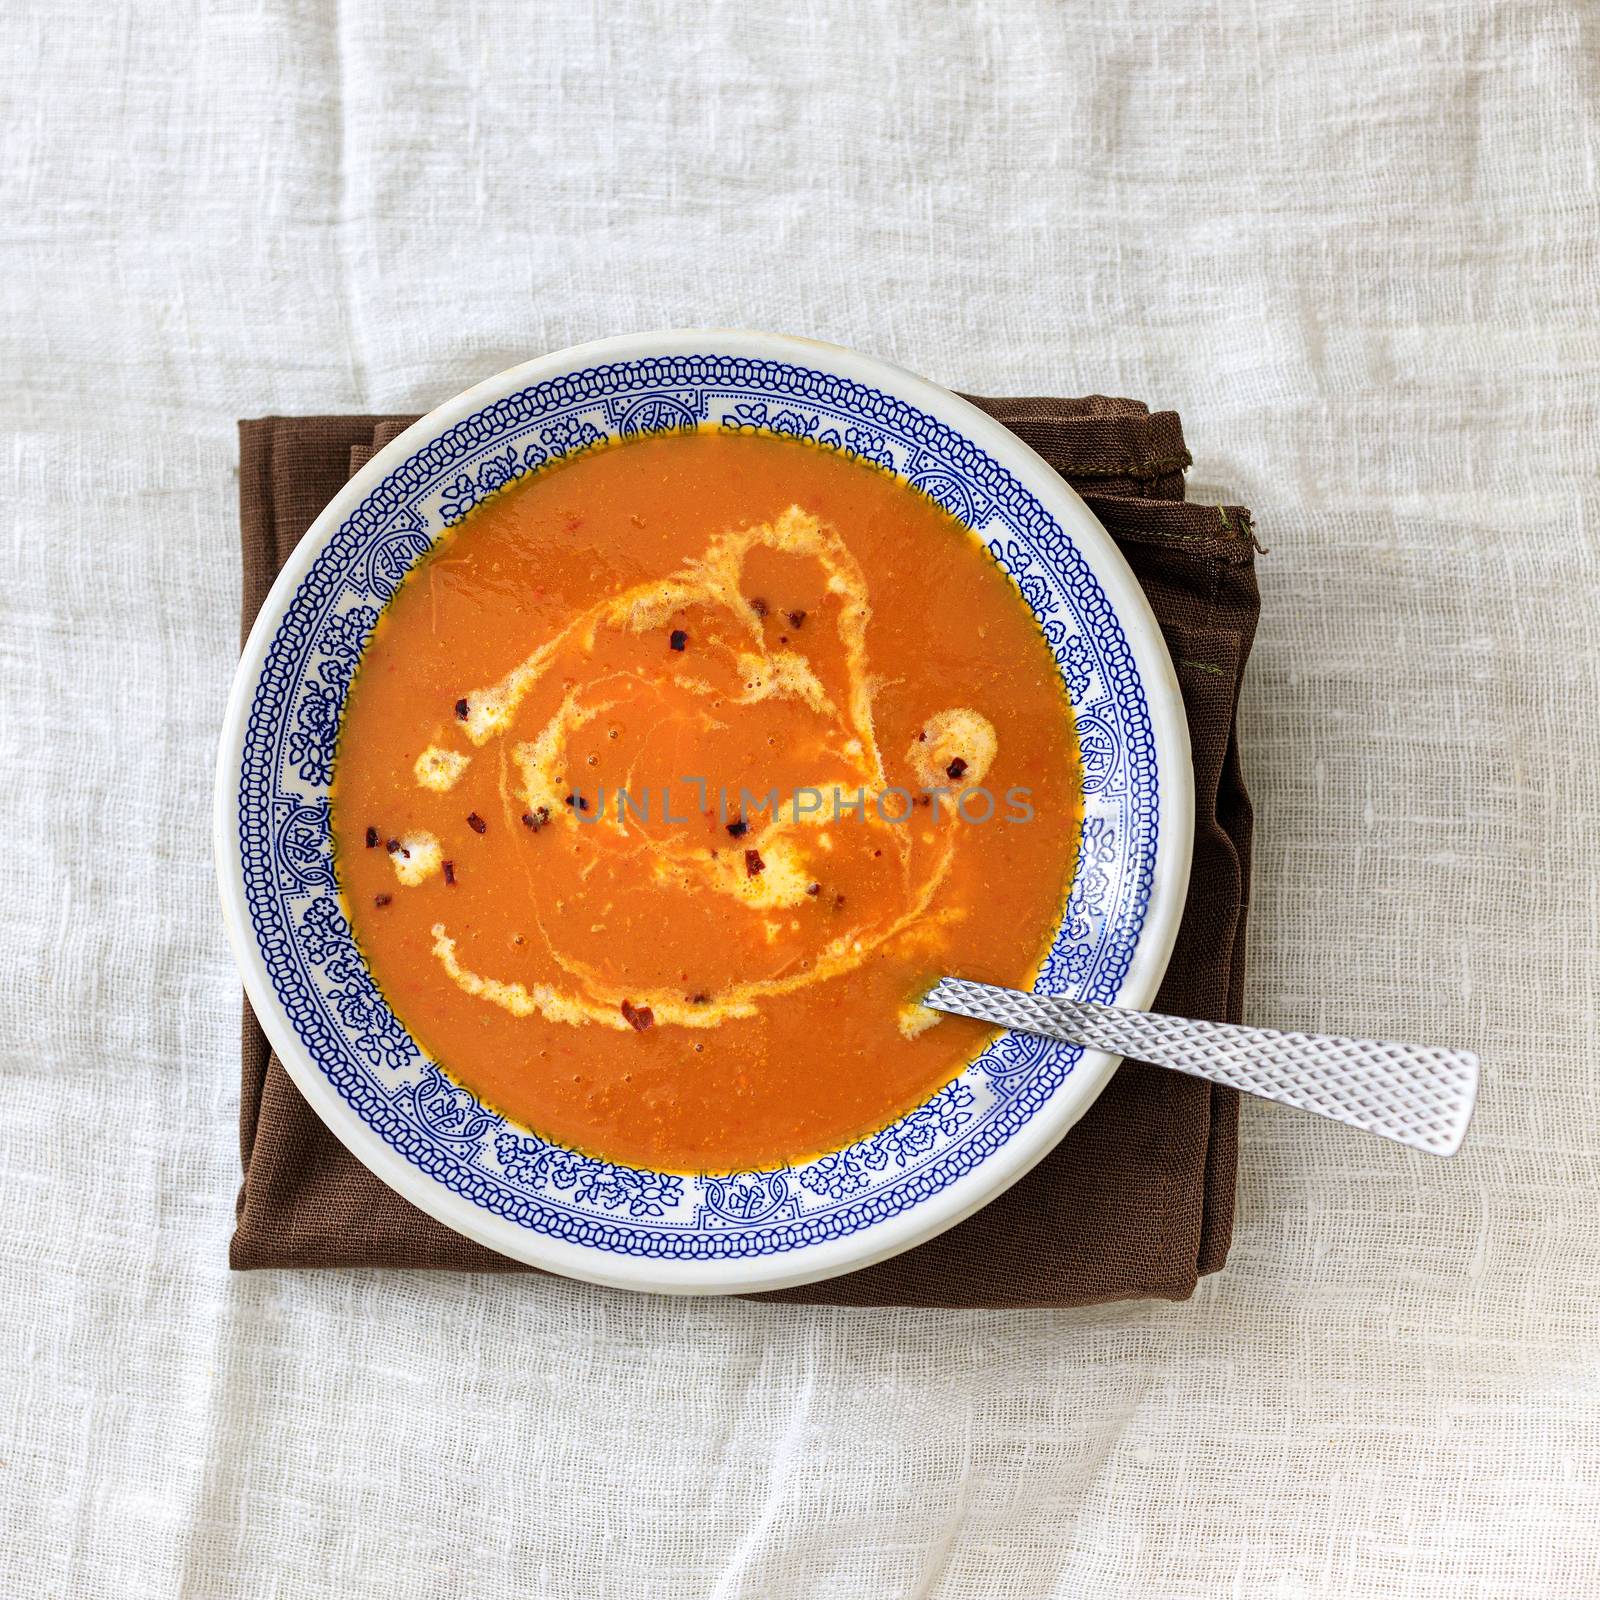 Orange pumpkin puree soup with smerana and red chili peppers in a plate with a blue traditional Moroccan pattern on a plain white background. Flat lay. Top view, copy space